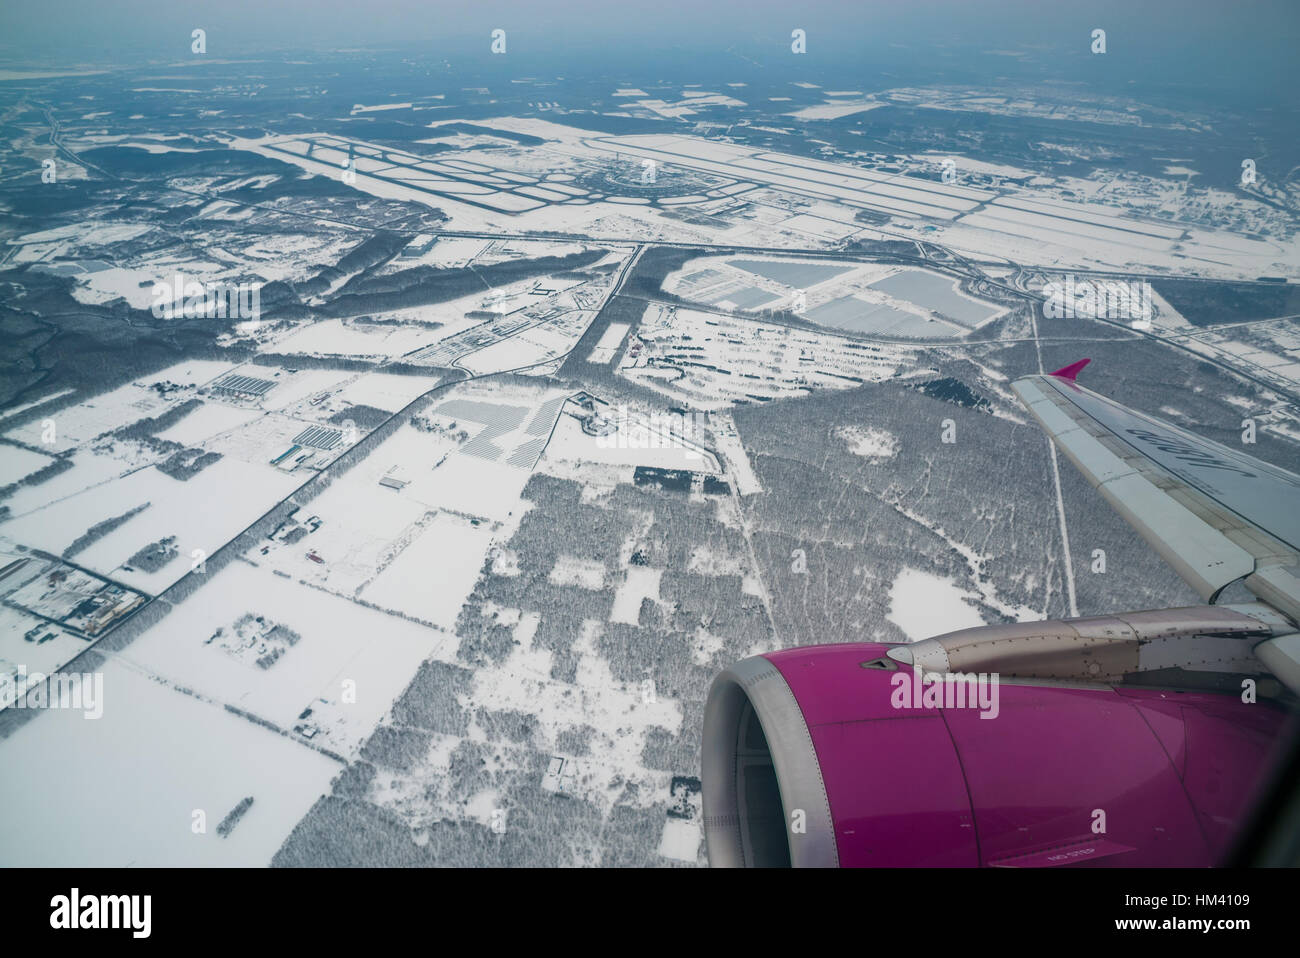 Departing from New Chitose Airport, Hokkaido, on a Peach Aviation flight Stock Photo